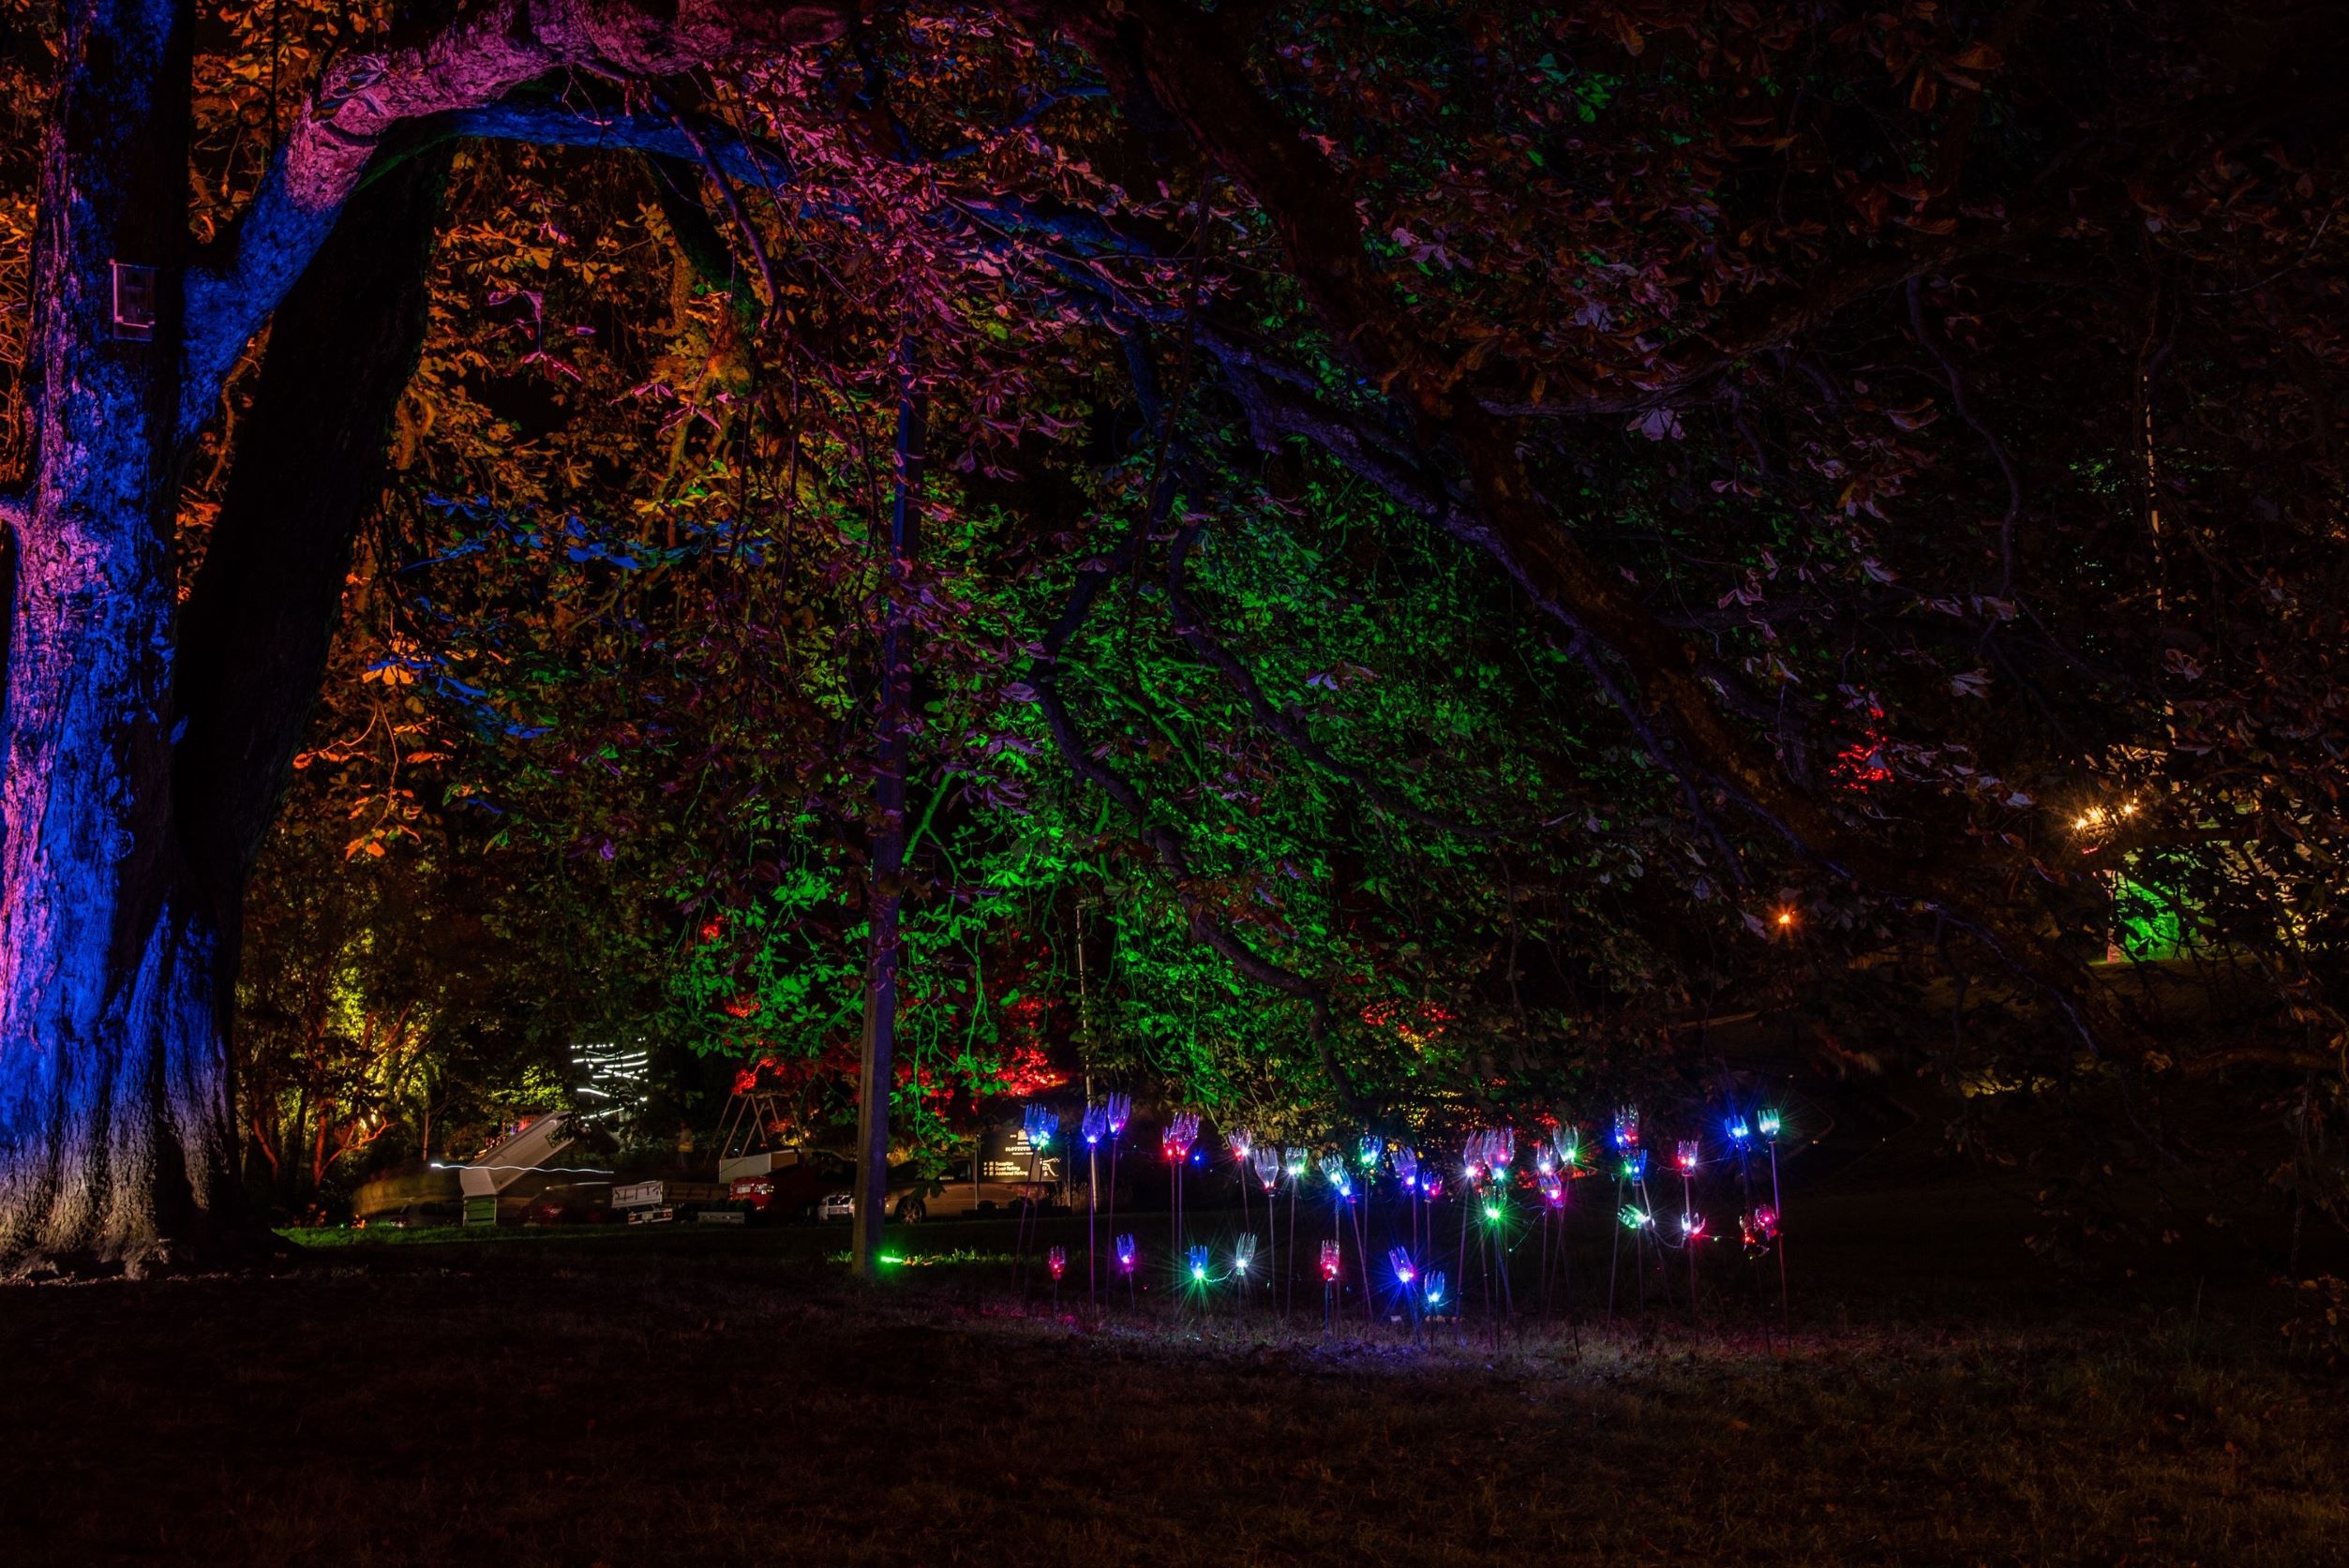  An illuminated tree from the September 2020 light event.